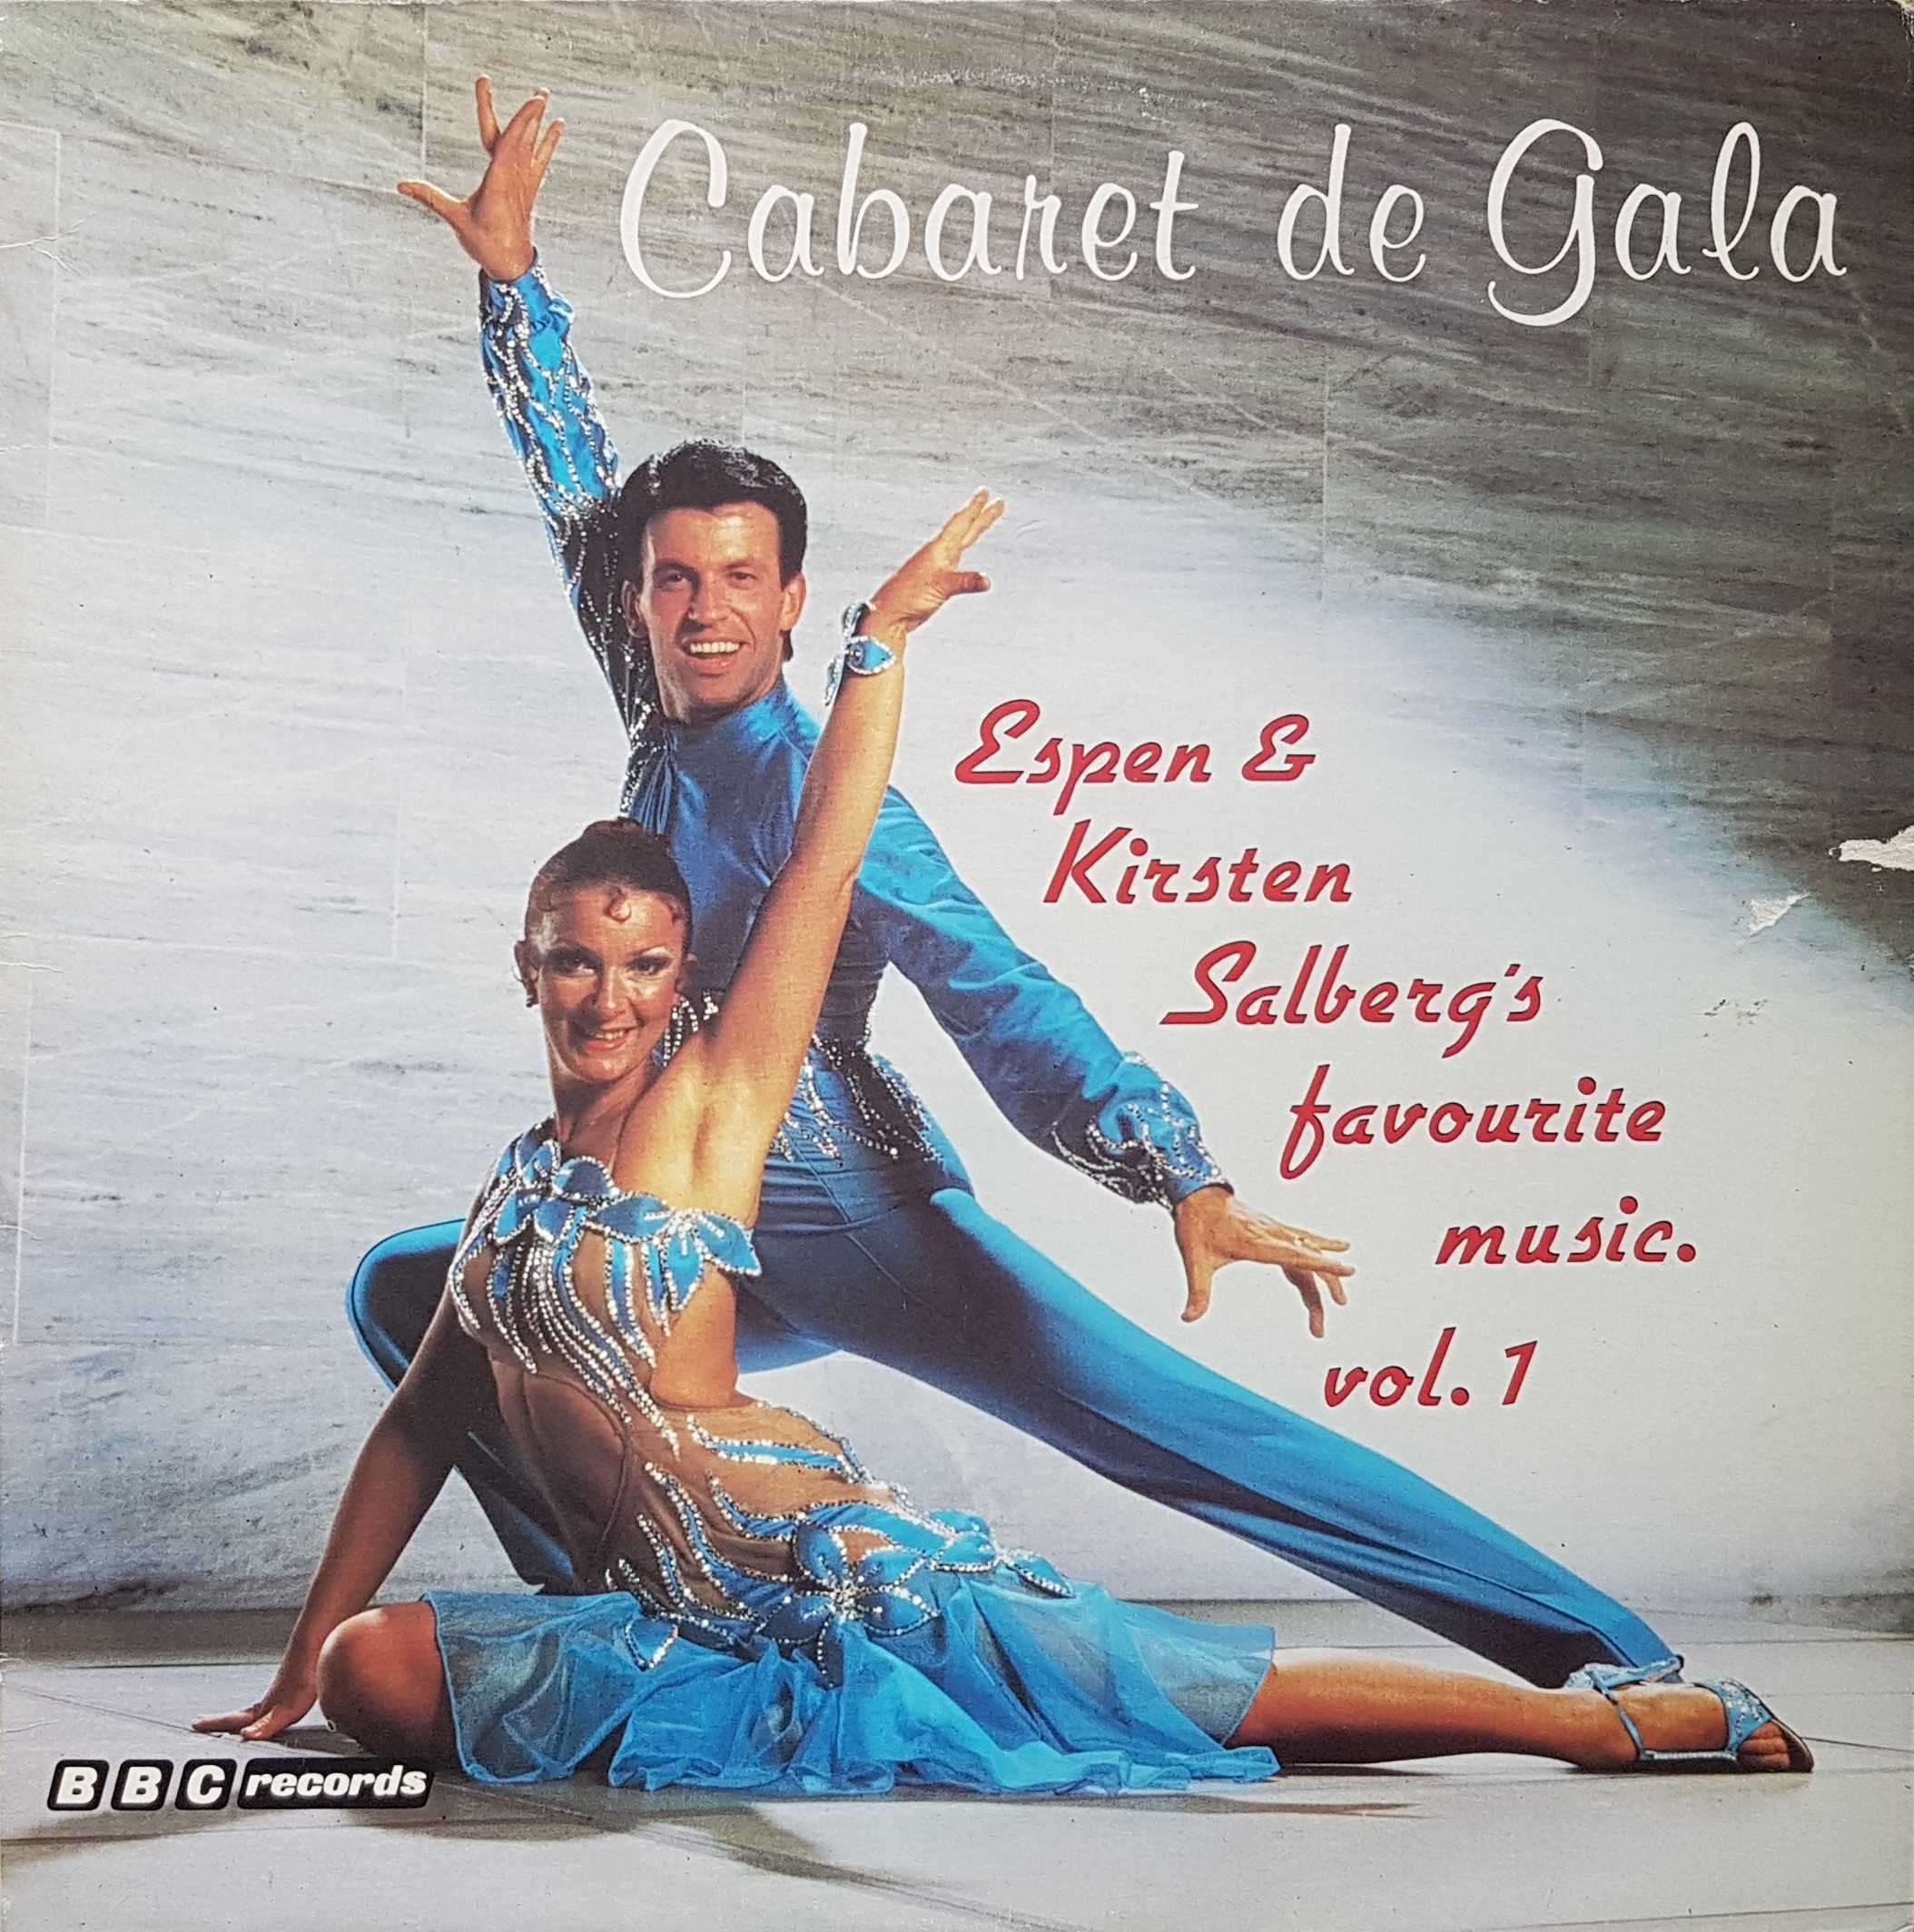 Picture of Cabaret de gala by artist Various from the BBC albums - Records and Tapes library